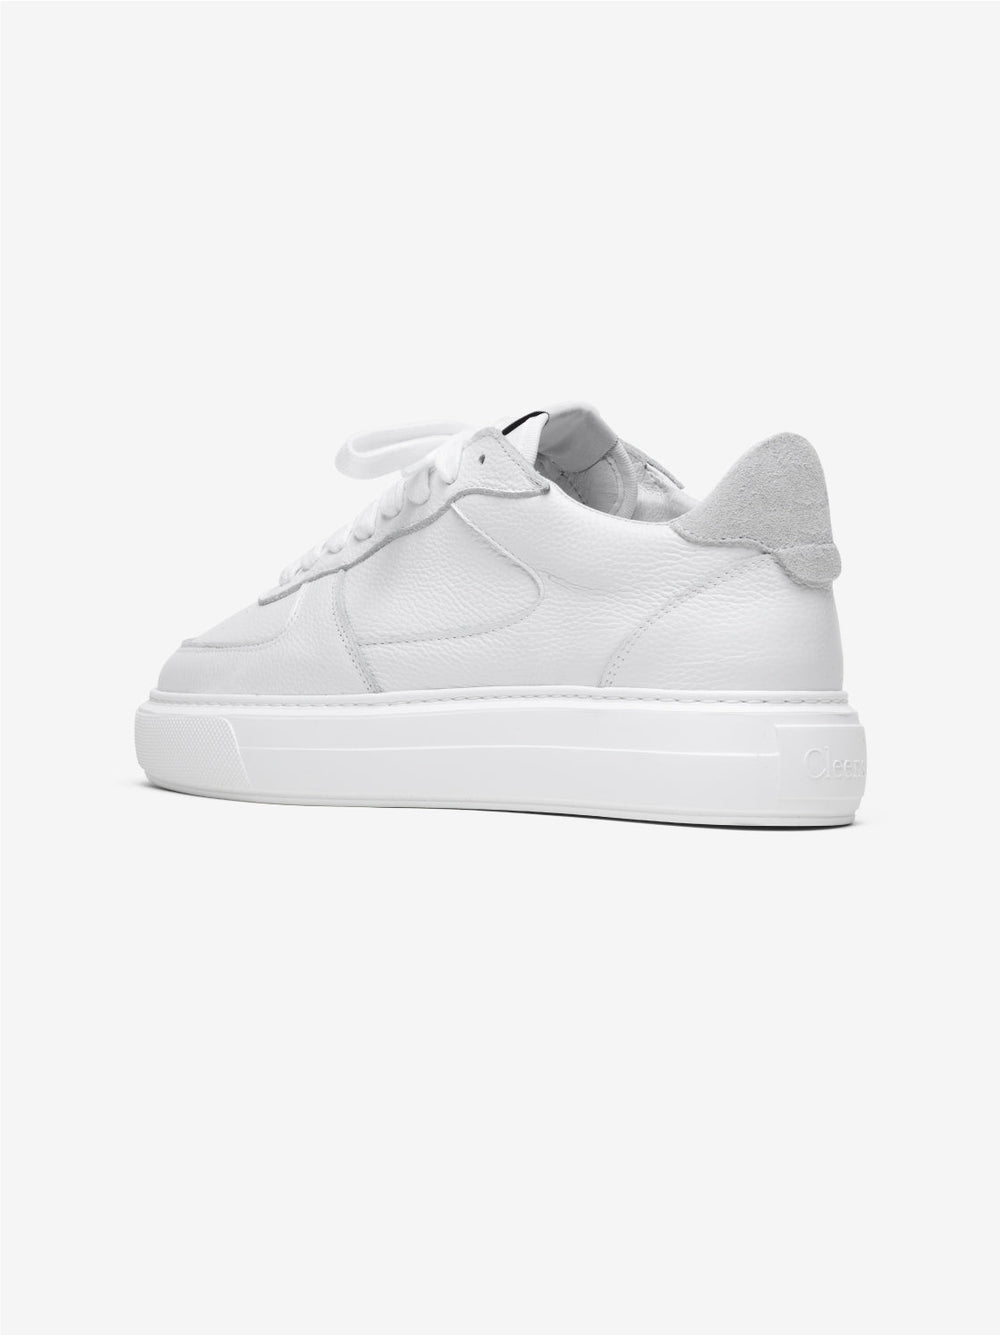 Court Trainer Triple White Tumbled leather-3